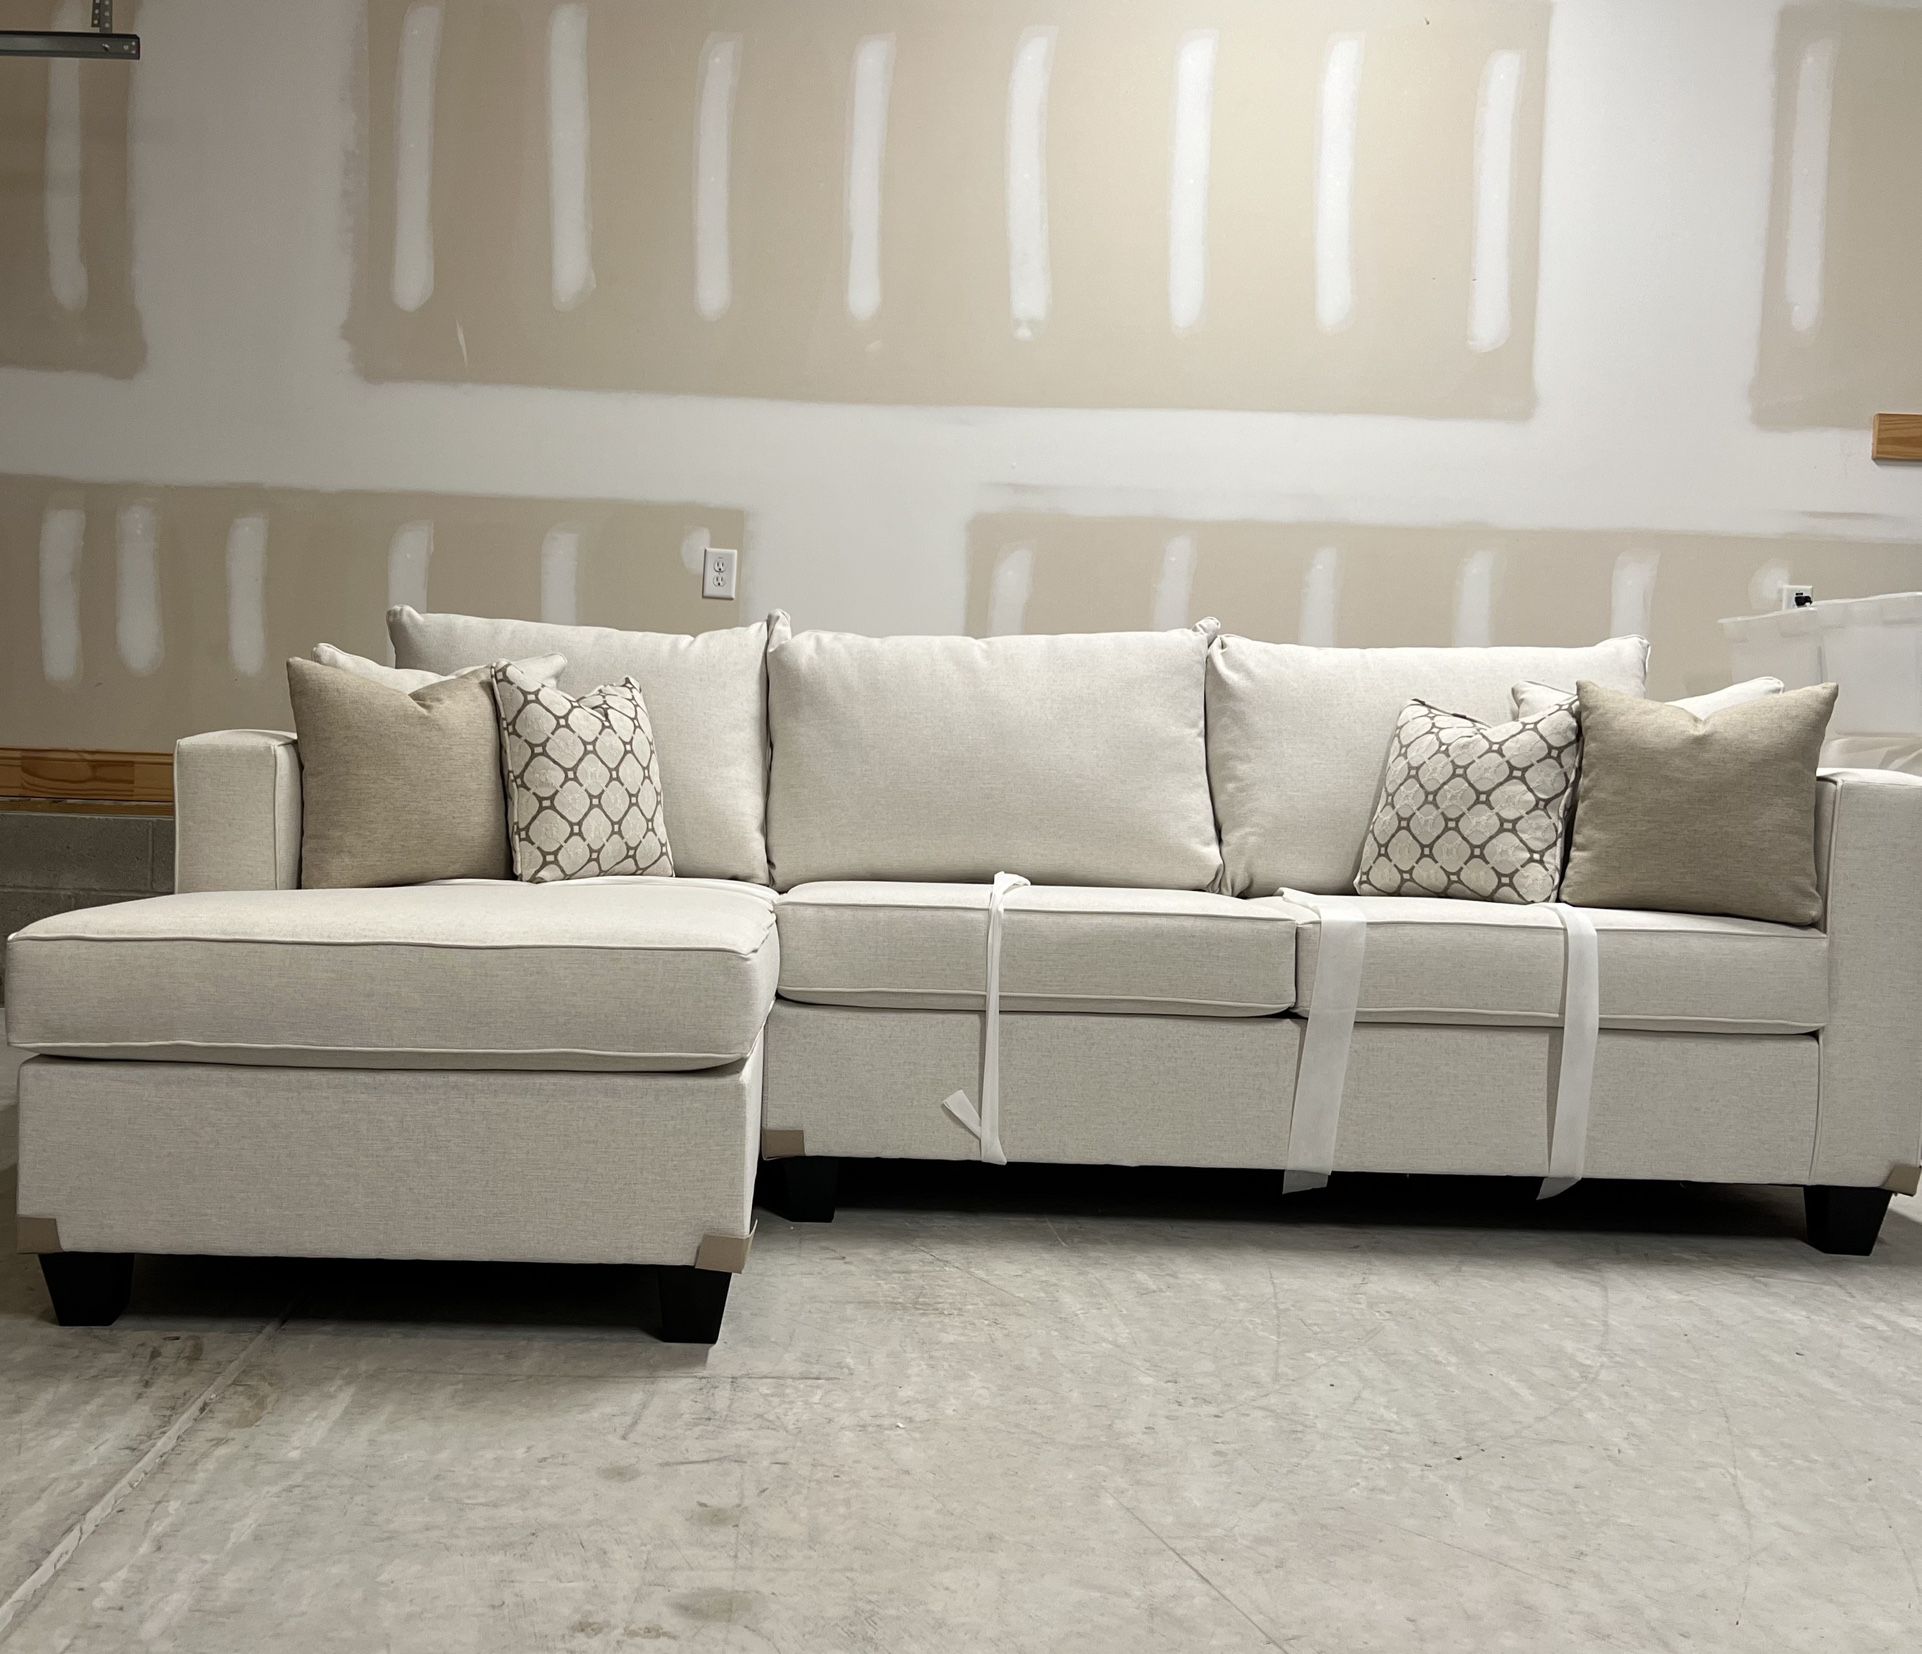 ⚪️New Sofa Chaise Sectional in Cotton White